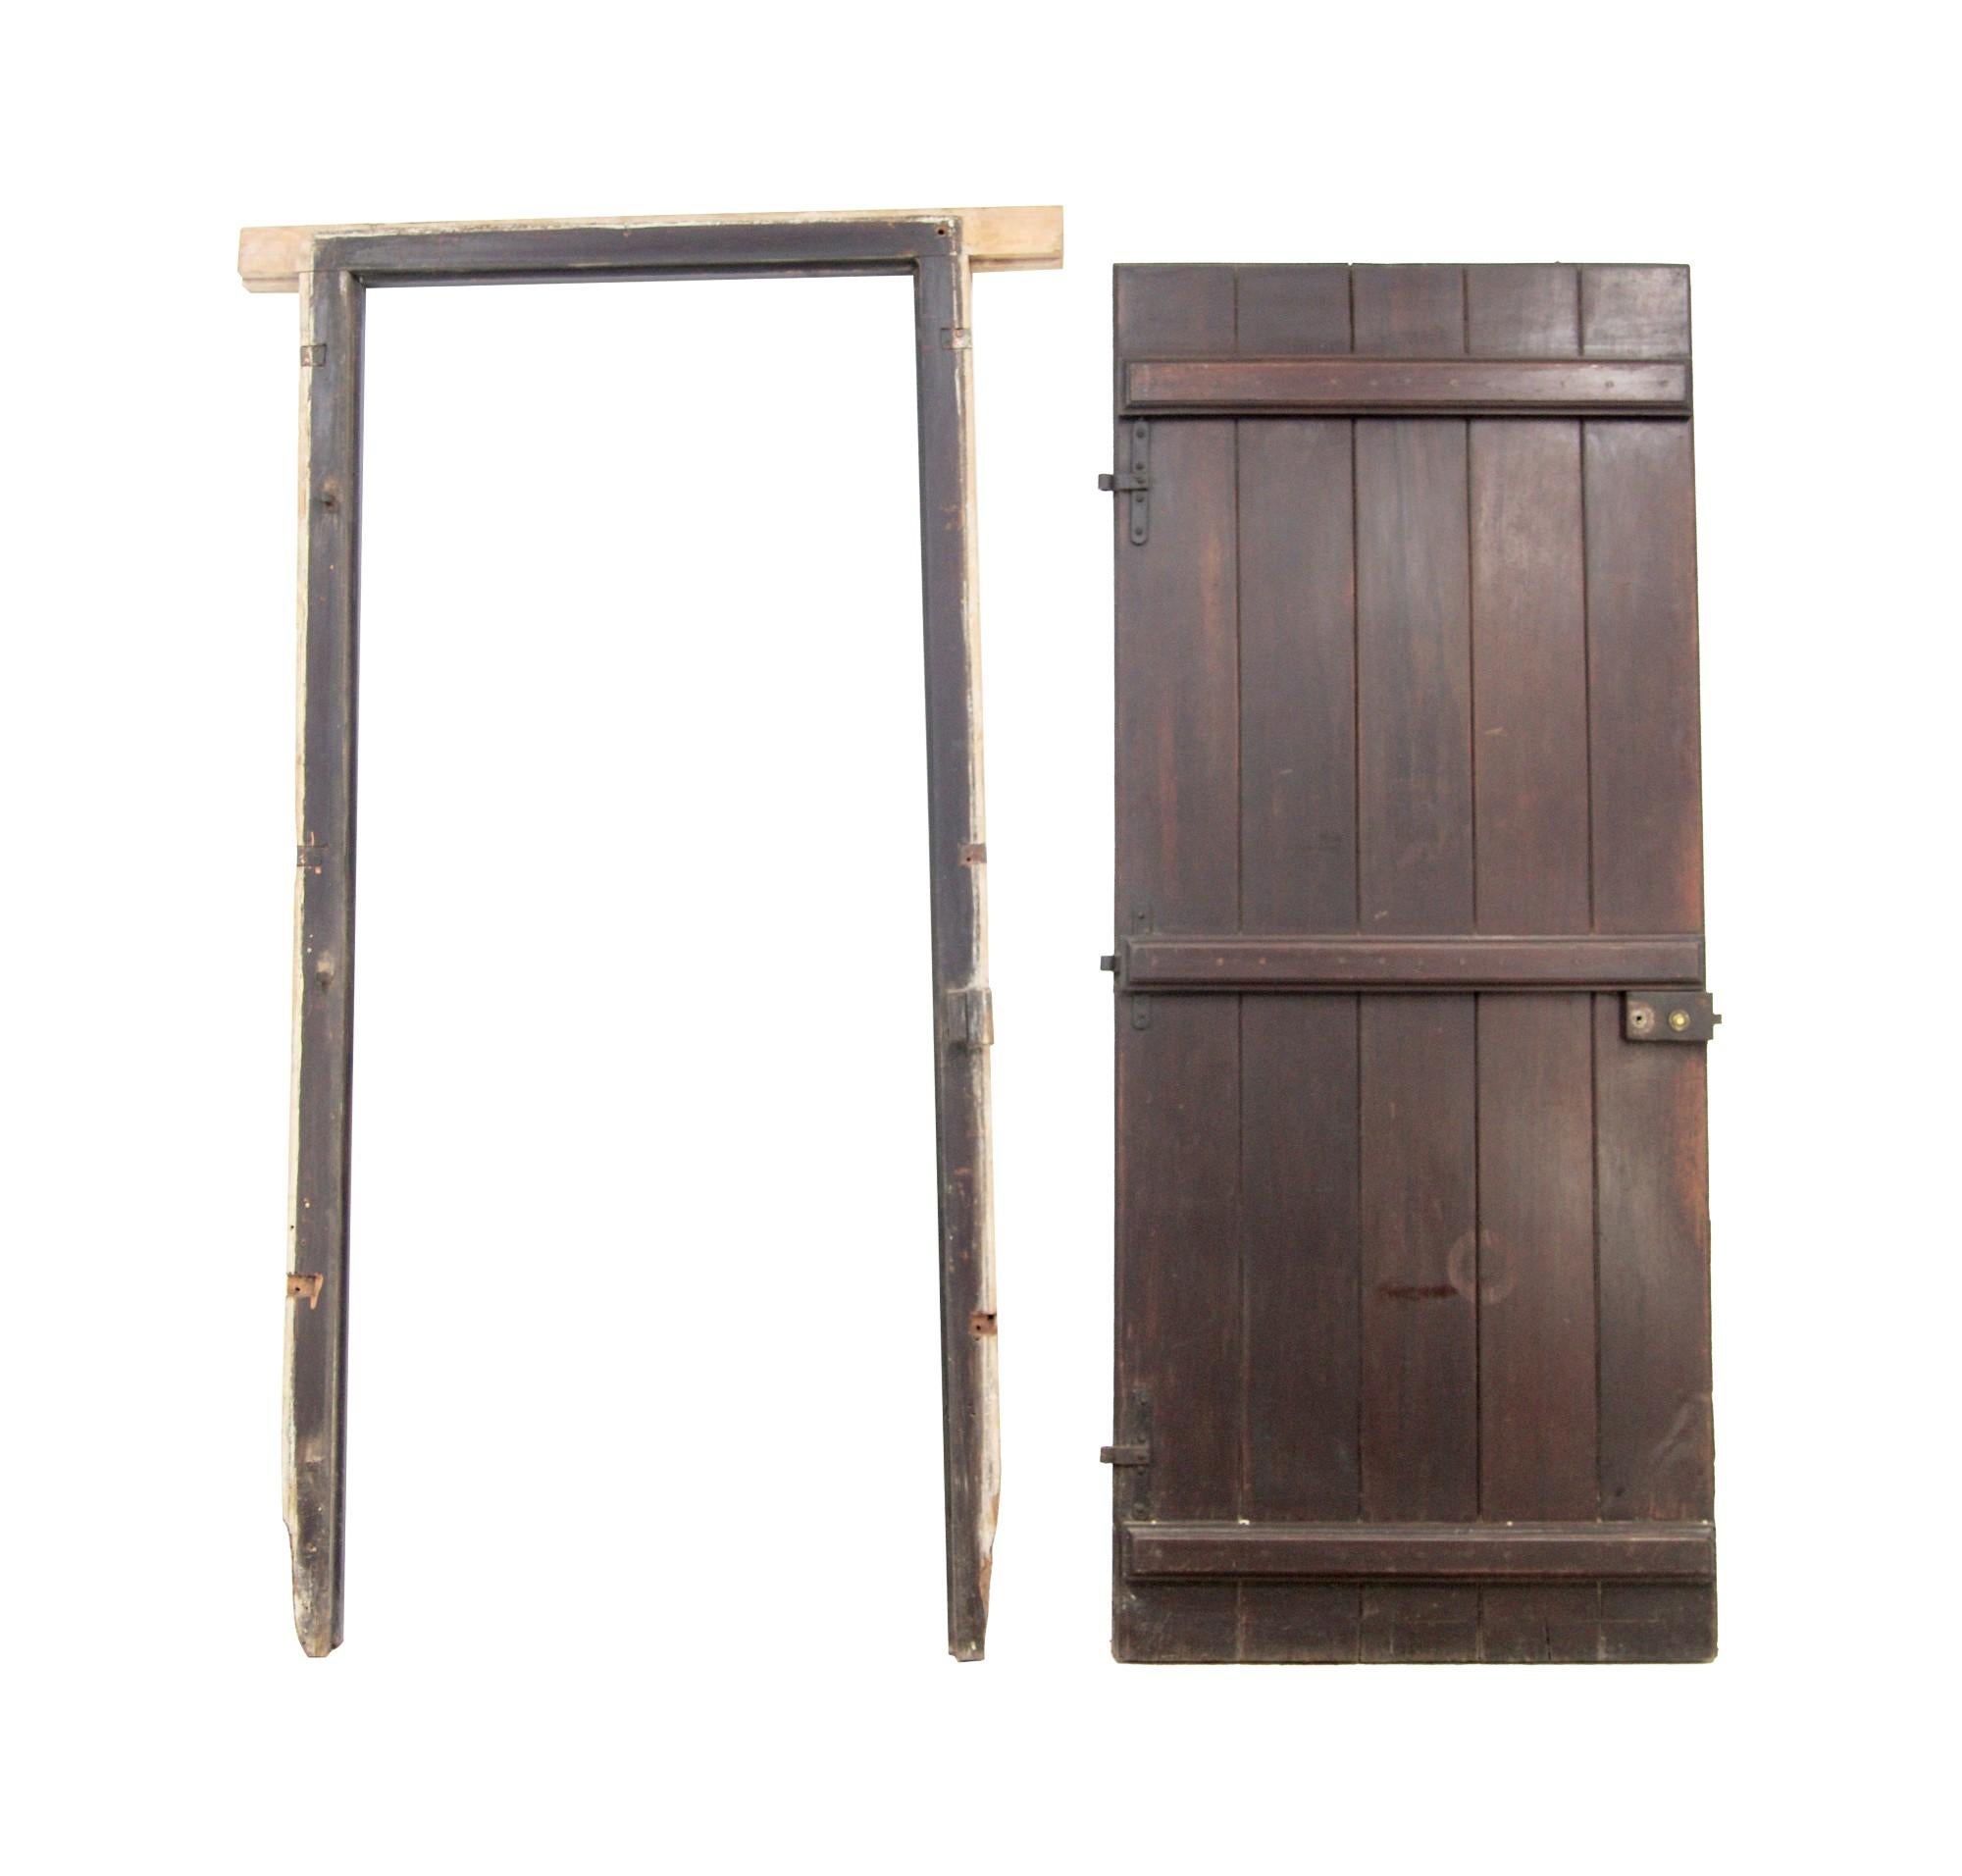 1920's reclaimed wine cellar door originally from Buenos Aires. This door comes complete with frame and original hardware. The wood is likely Spanish cedar and consists of 5 vertical wood planks. This can be seen at our 400 Gilligan St location in